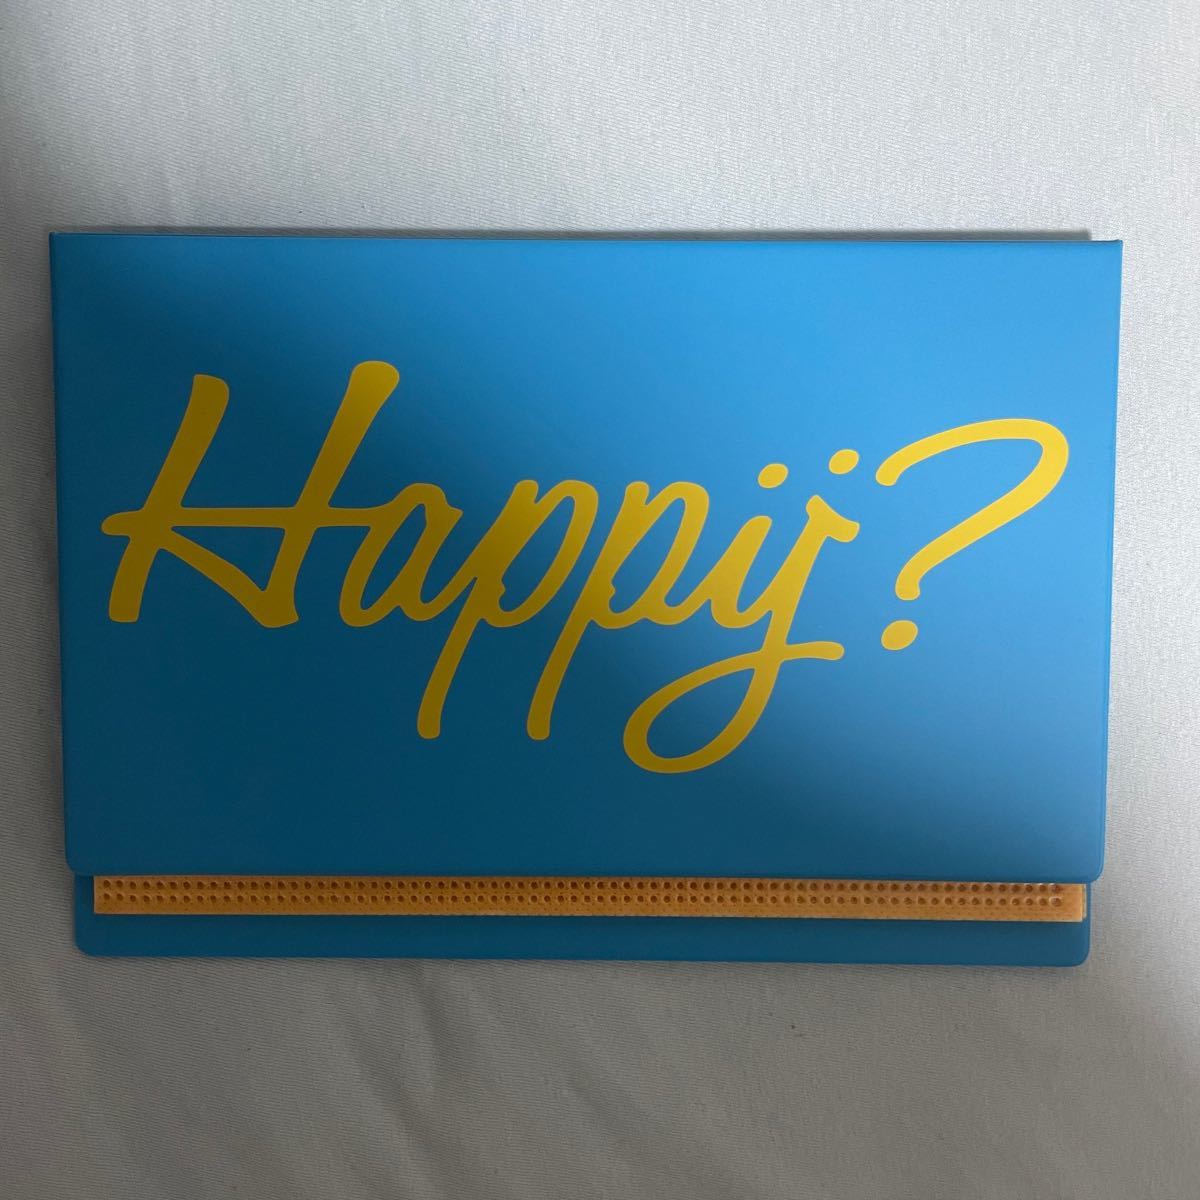 Paypayフリマ 嵐 Arashi Are You Happy 会報ファイル 会報フォルダー ツアーグッズ アユハピ